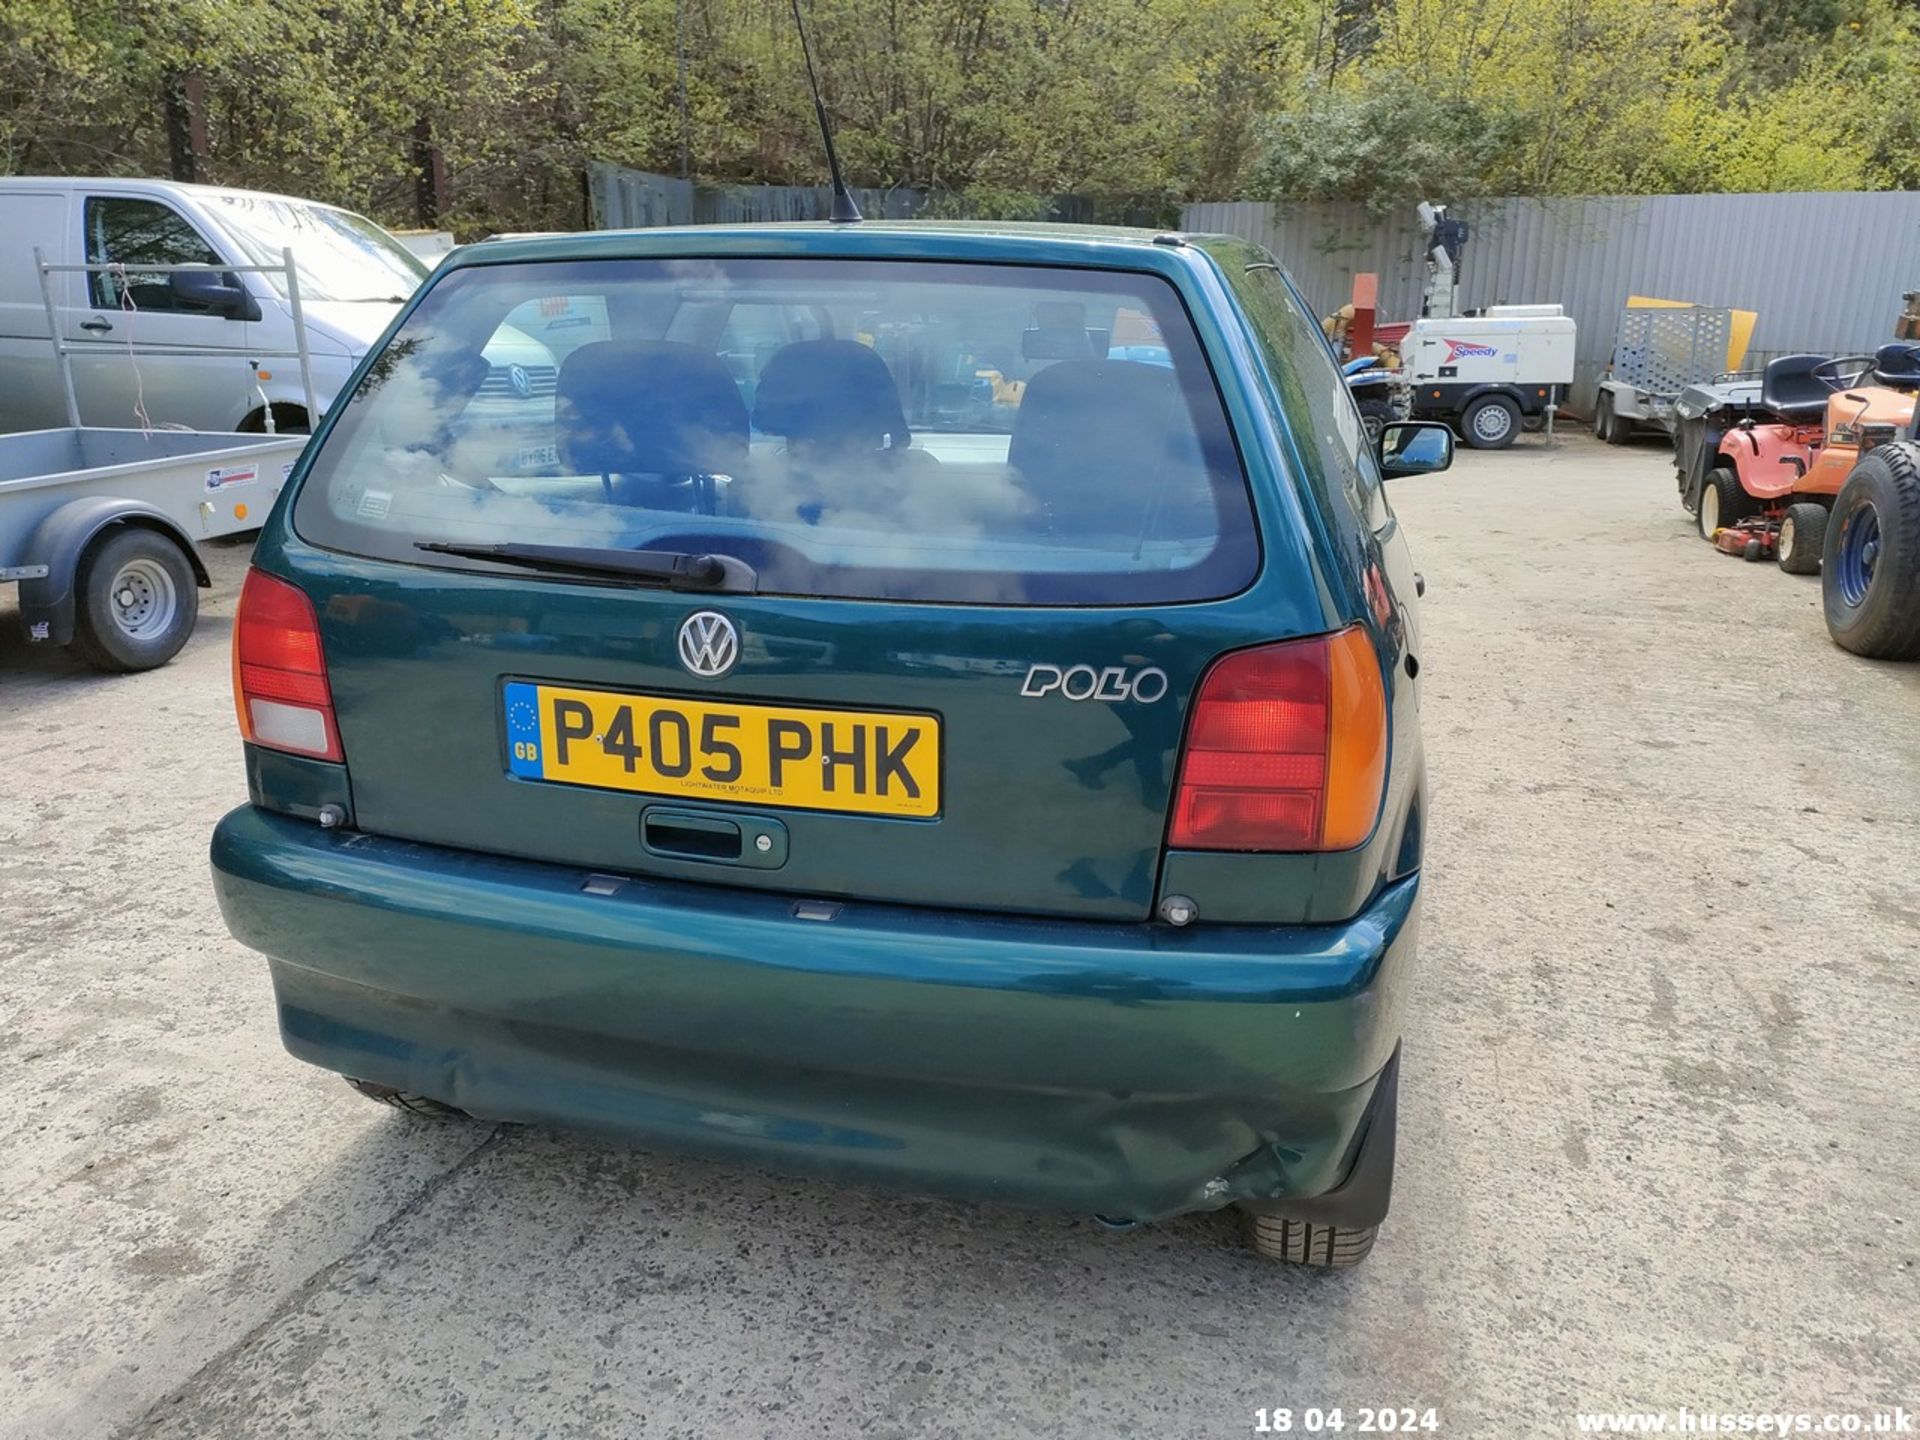 1997 VOLKSWAGEN POLO 1.4 CL AUTO - 1390cc 3dr Hatchback (Green, 68k) - Image 32 of 60